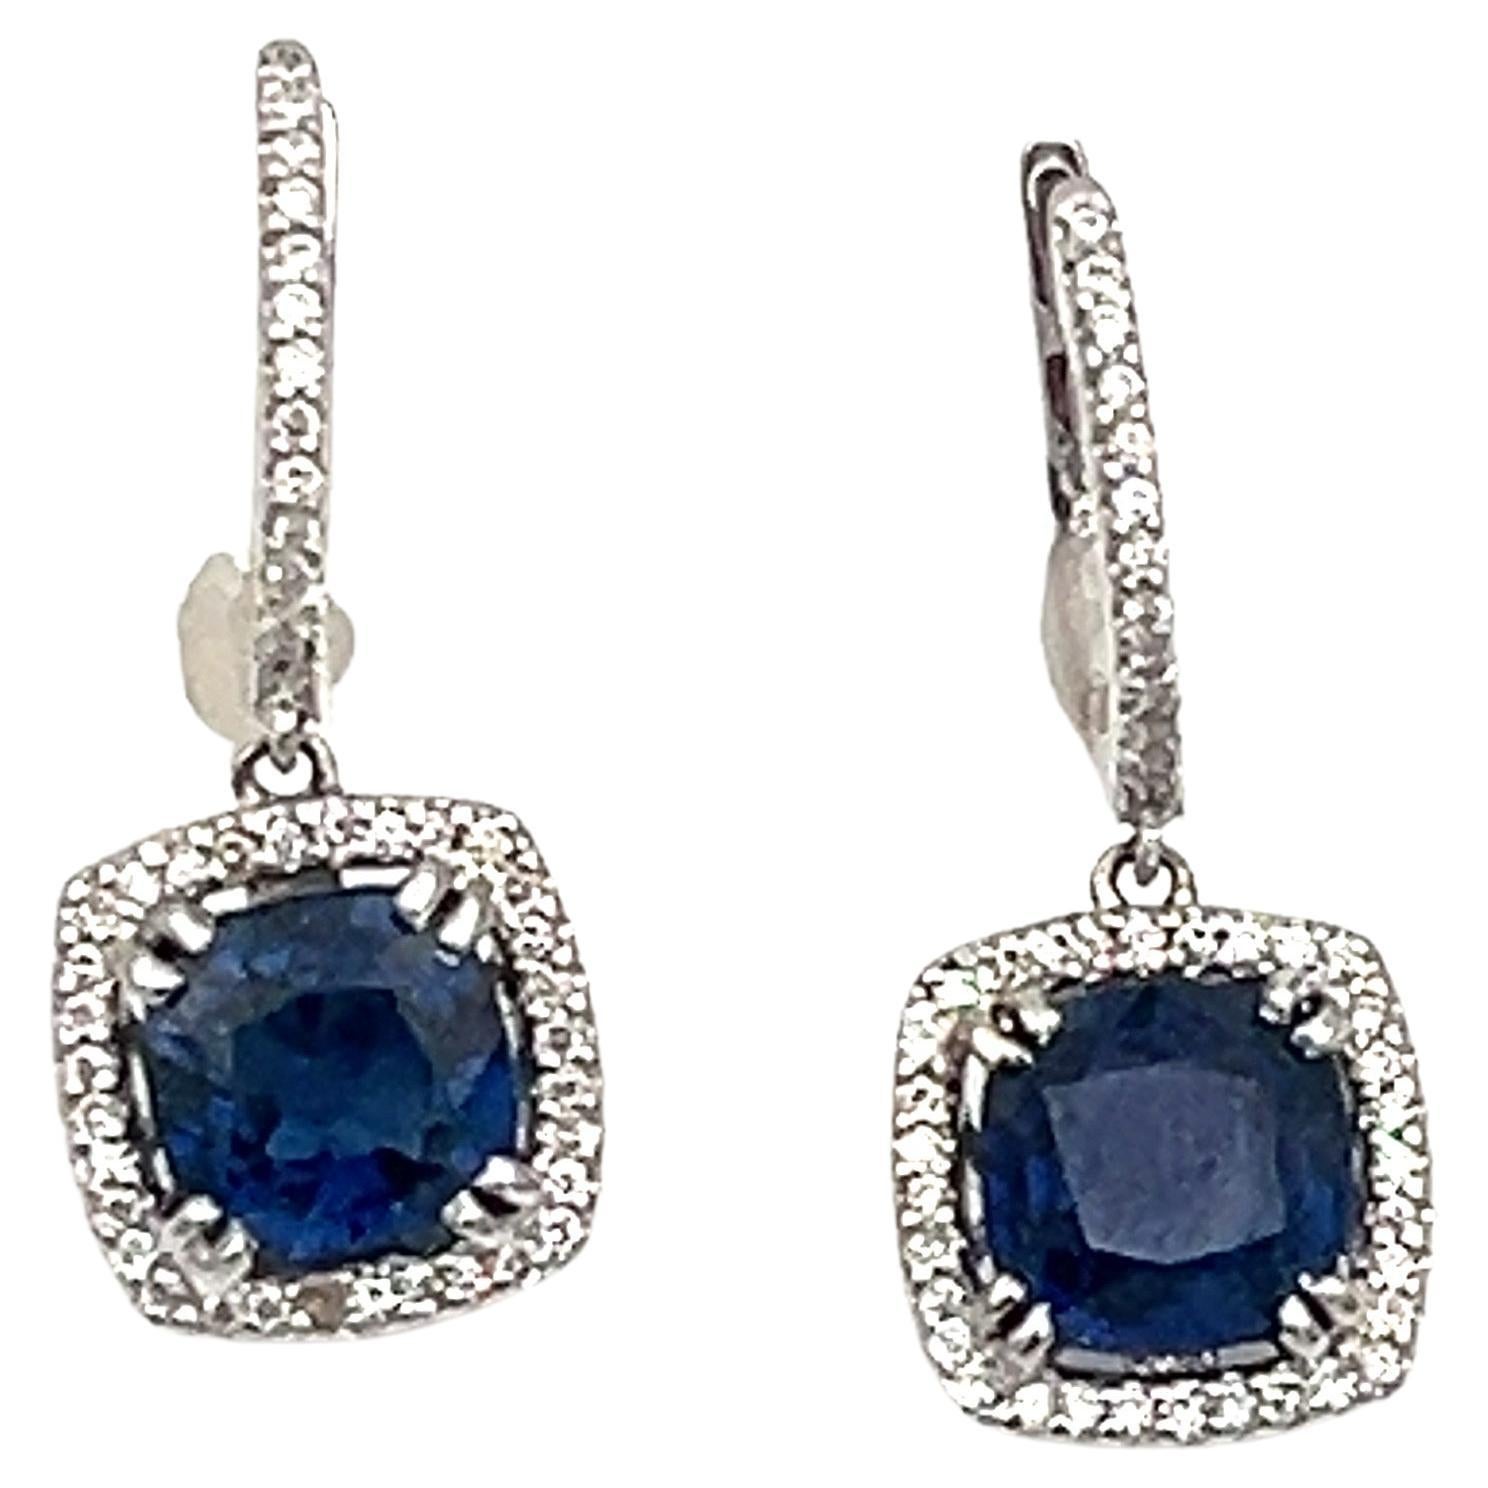 3.71 ct Natural Sapphire & Diamond Earrings For Sale